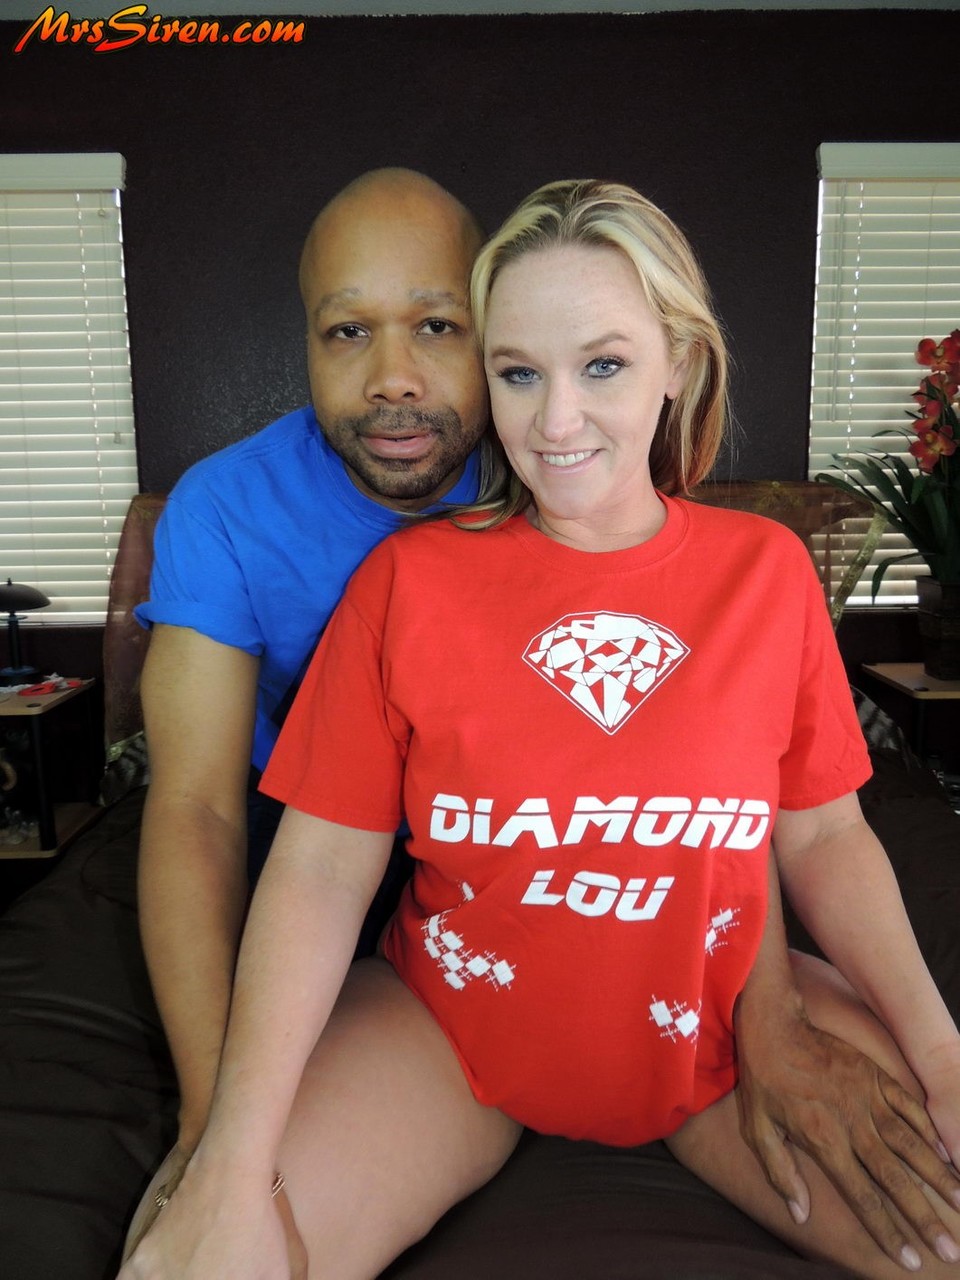 Blonde amateur Dee Siren shows her natural tits before donning a T-shirt foto porno #425423805 | Mrs Siren Pics, Dee Siren, Chubby, porno mobile